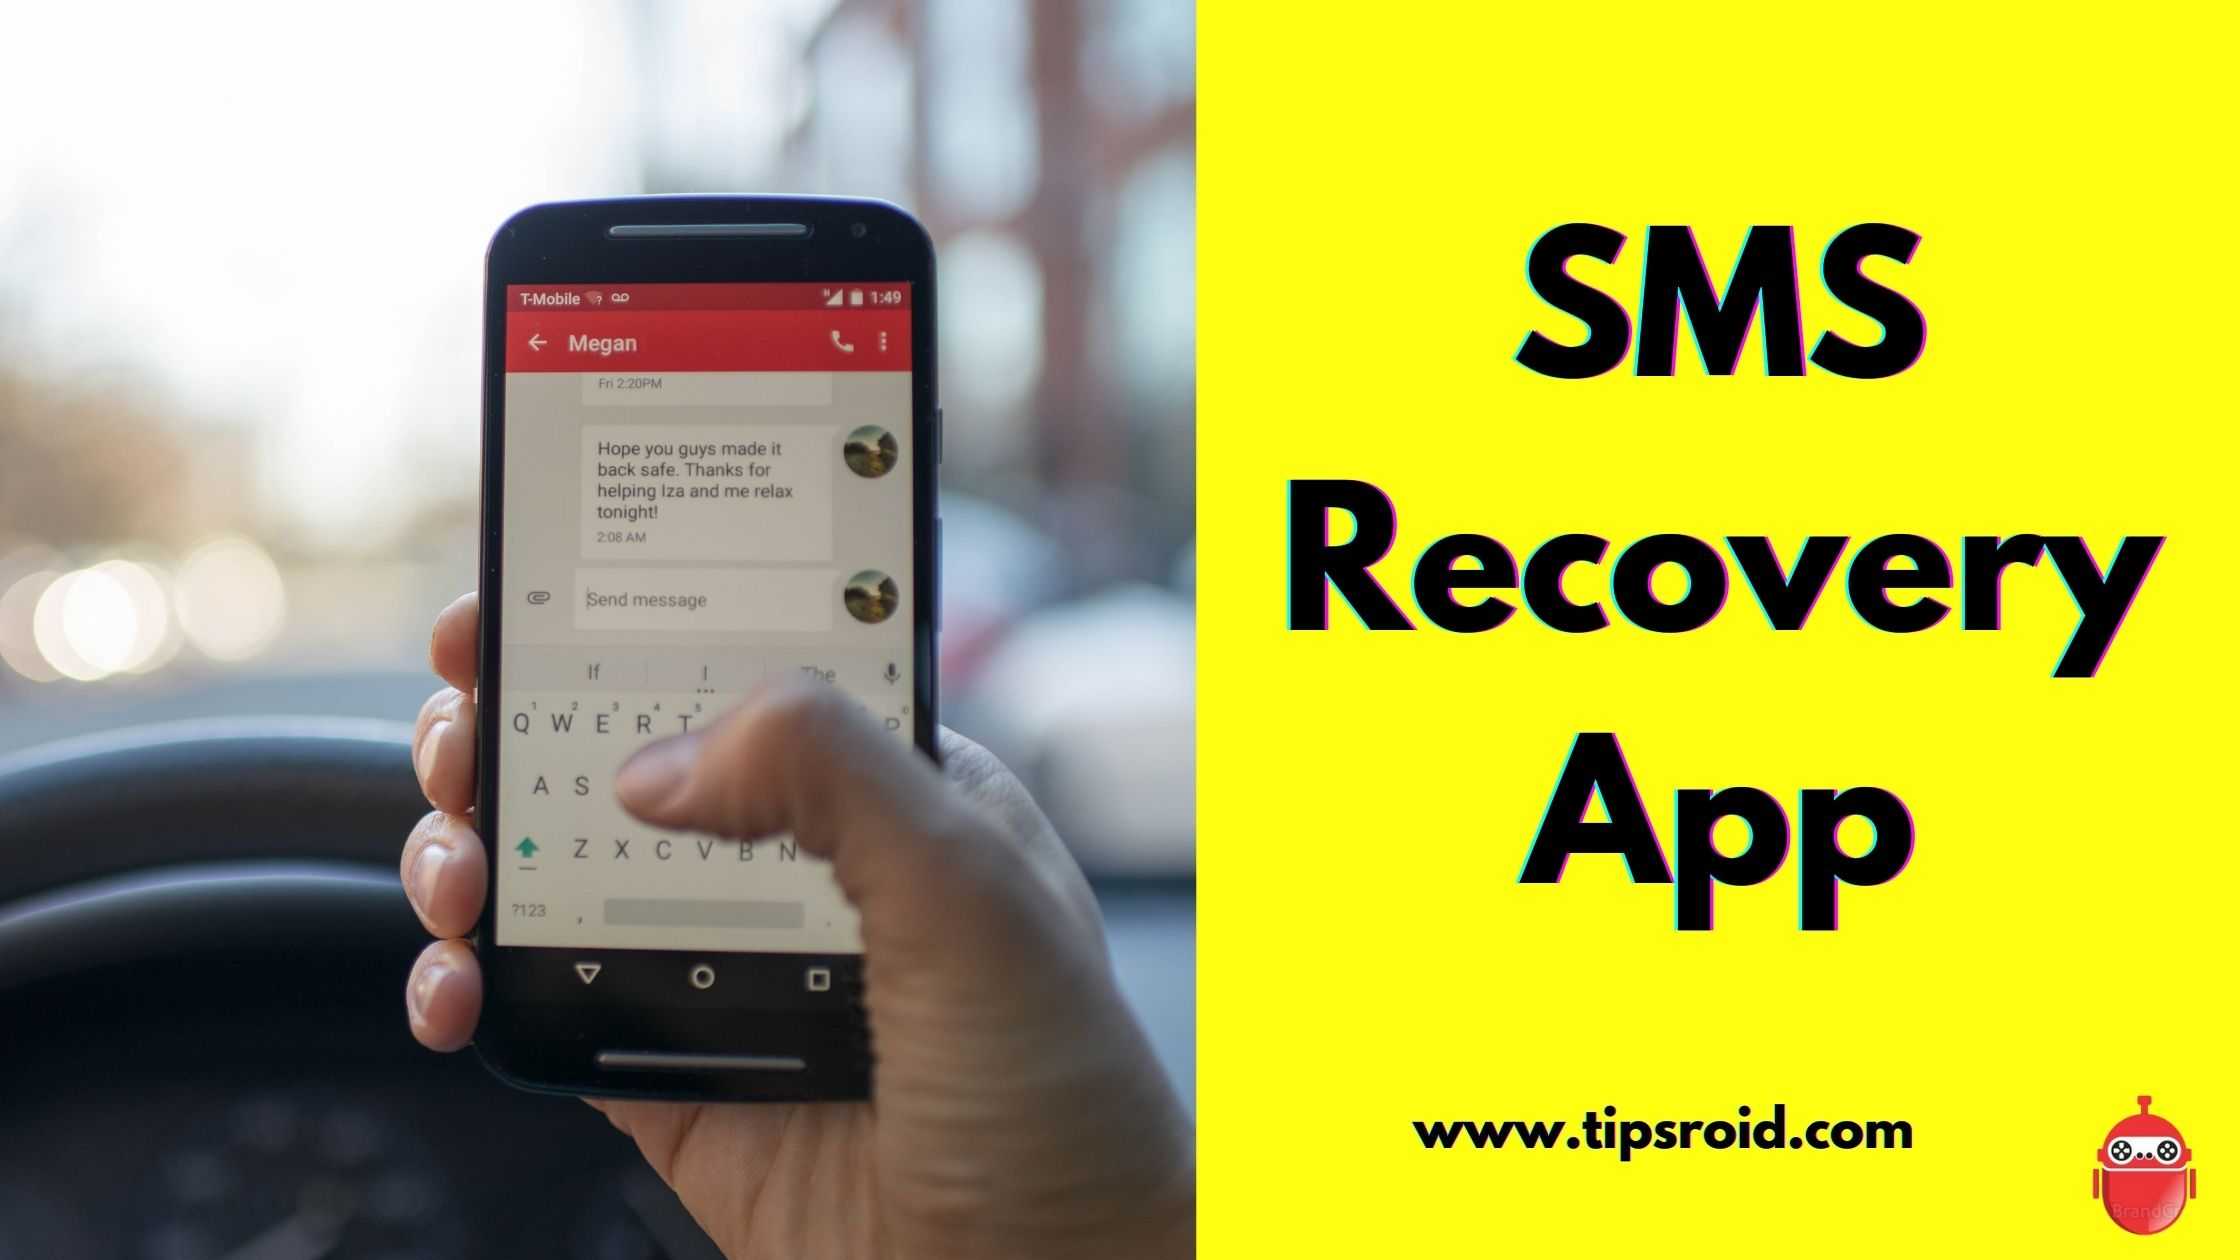 SMS Recovery App